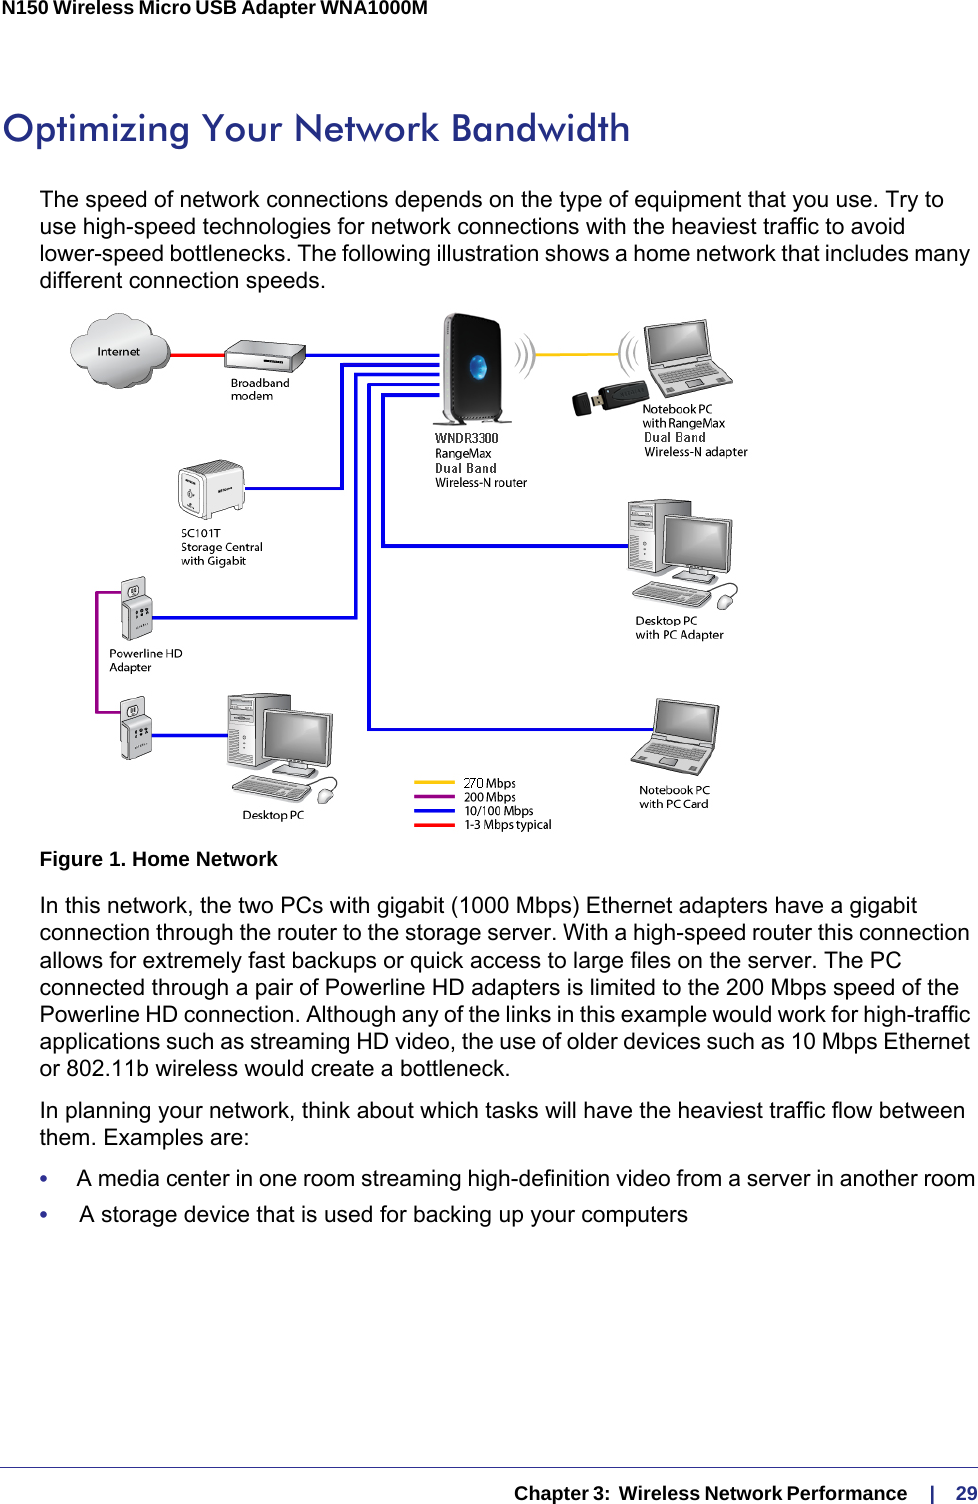   Chapter 3:  Wireless Network Performance     |    29N150 Wireless Micro USB Adapter WNA1000M Optimizing Your Network BandwidthThe speed of network connections depends on the type of equipment that you use. Try to use high-speed technologies for network connections with the heaviest traffic to avoid lower-speed bottlenecks. The following illustration shows a home network that includes many different connection speeds.Figure 1. Home NetworkIn this network, the two PCs with gigabit (1000 Mbps) Ethernet adapters have a gigabit connection through the router to the storage server. With a high-speed router this connection allows for extremely fast backups or quick access to large files on the server. The PC connected through a pair of Powerline HD adapters is limited to the 200 Mbps speed of the Powerline HD connection. Although any of the links in this example would work for high-traffic applications such as streaming HD video, the use of older devices such as 10 Mbps Ethernet or 802.11b wireless would create a bottleneck.In planning your network, think about which tasks will have the heaviest traffic flow between them. Examples are:•     A media center in one room streaming high-definition video from a server in another room•     A storage device that is used for backing up your computers